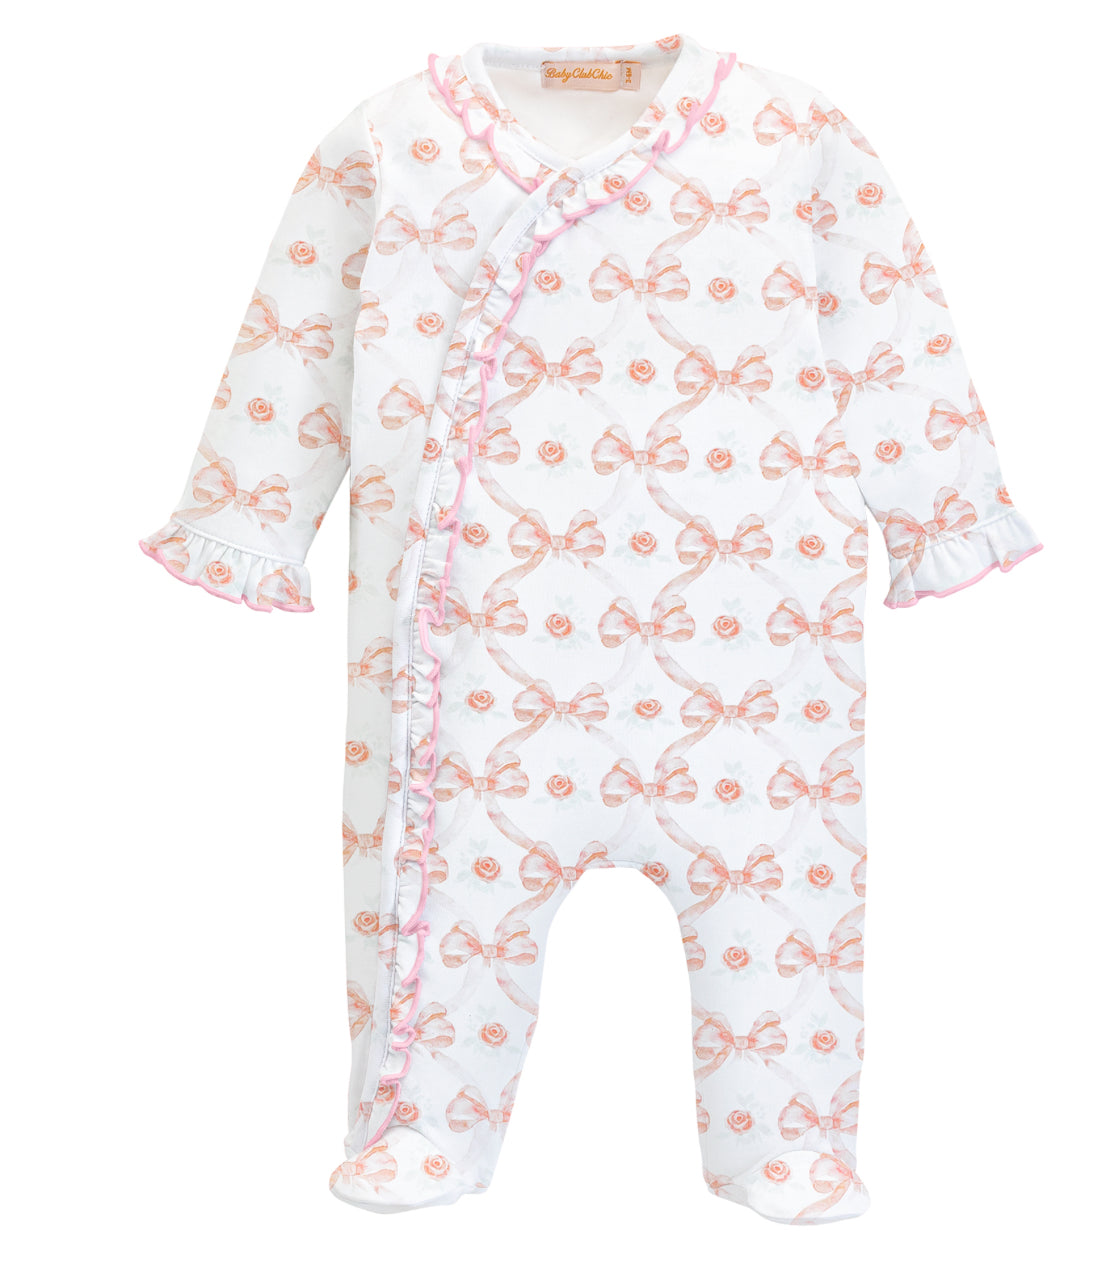 Bows & Roses Footie with Ruffle